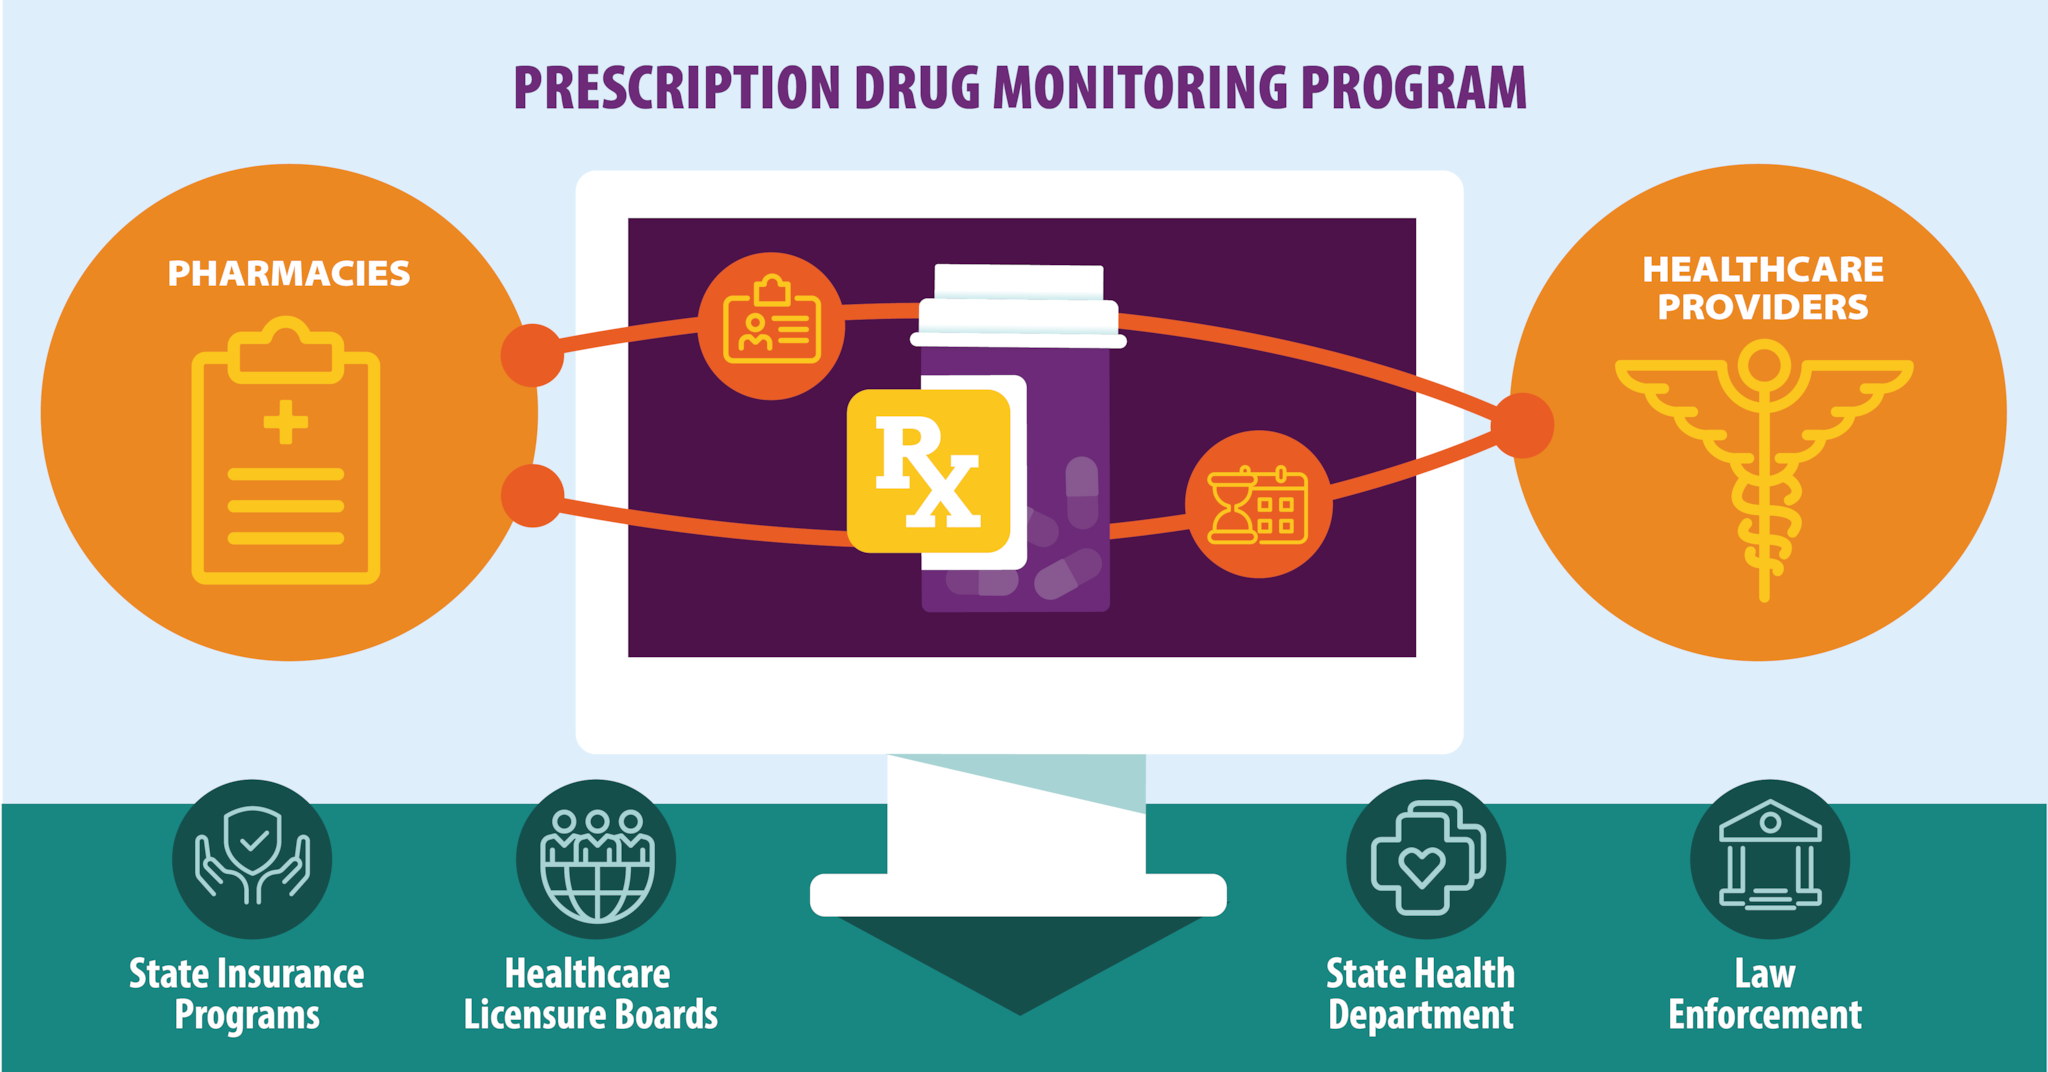 A prescription drug monitoring program (PDMP) is an electronic database that tracks controlled substance prescriptions in a state.